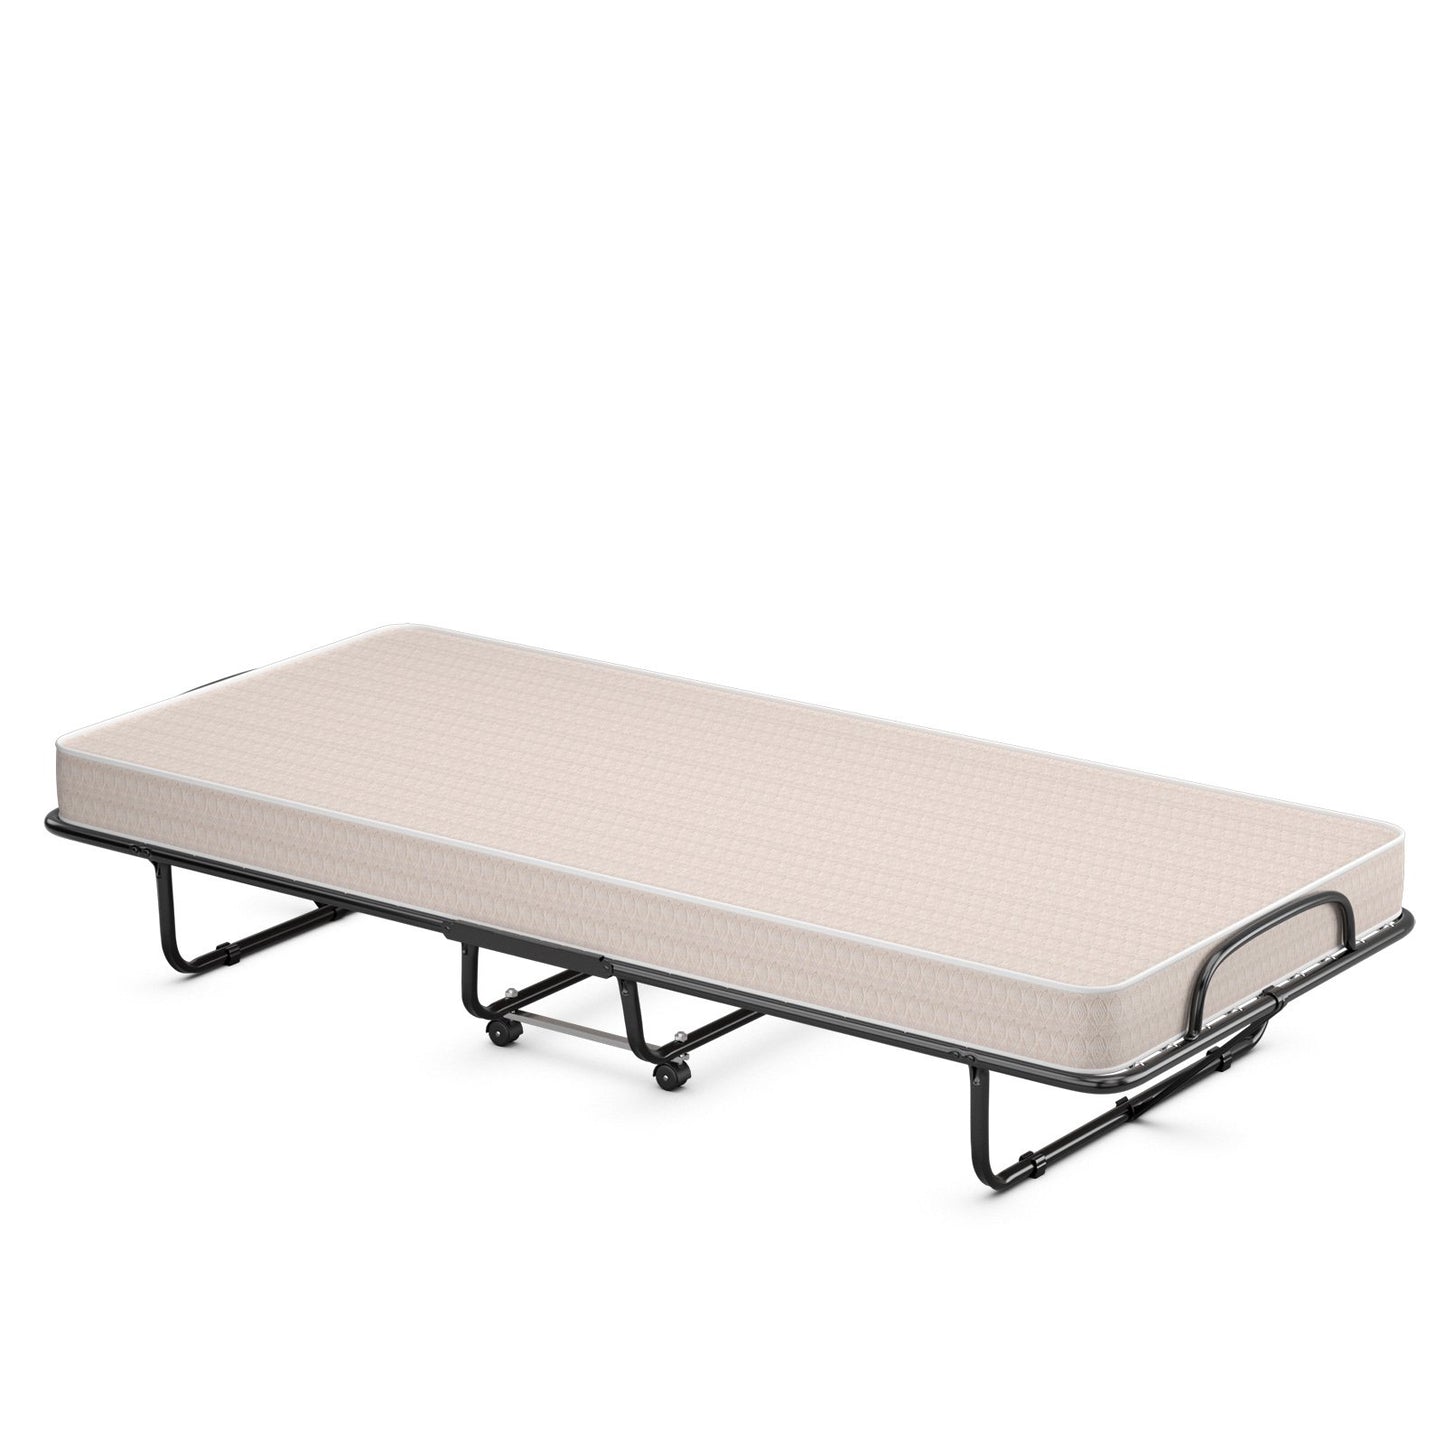 Rollaway Guest Bed with Sturdy Steel Frame and Memory Foam Mattress Made in Italy, Beige